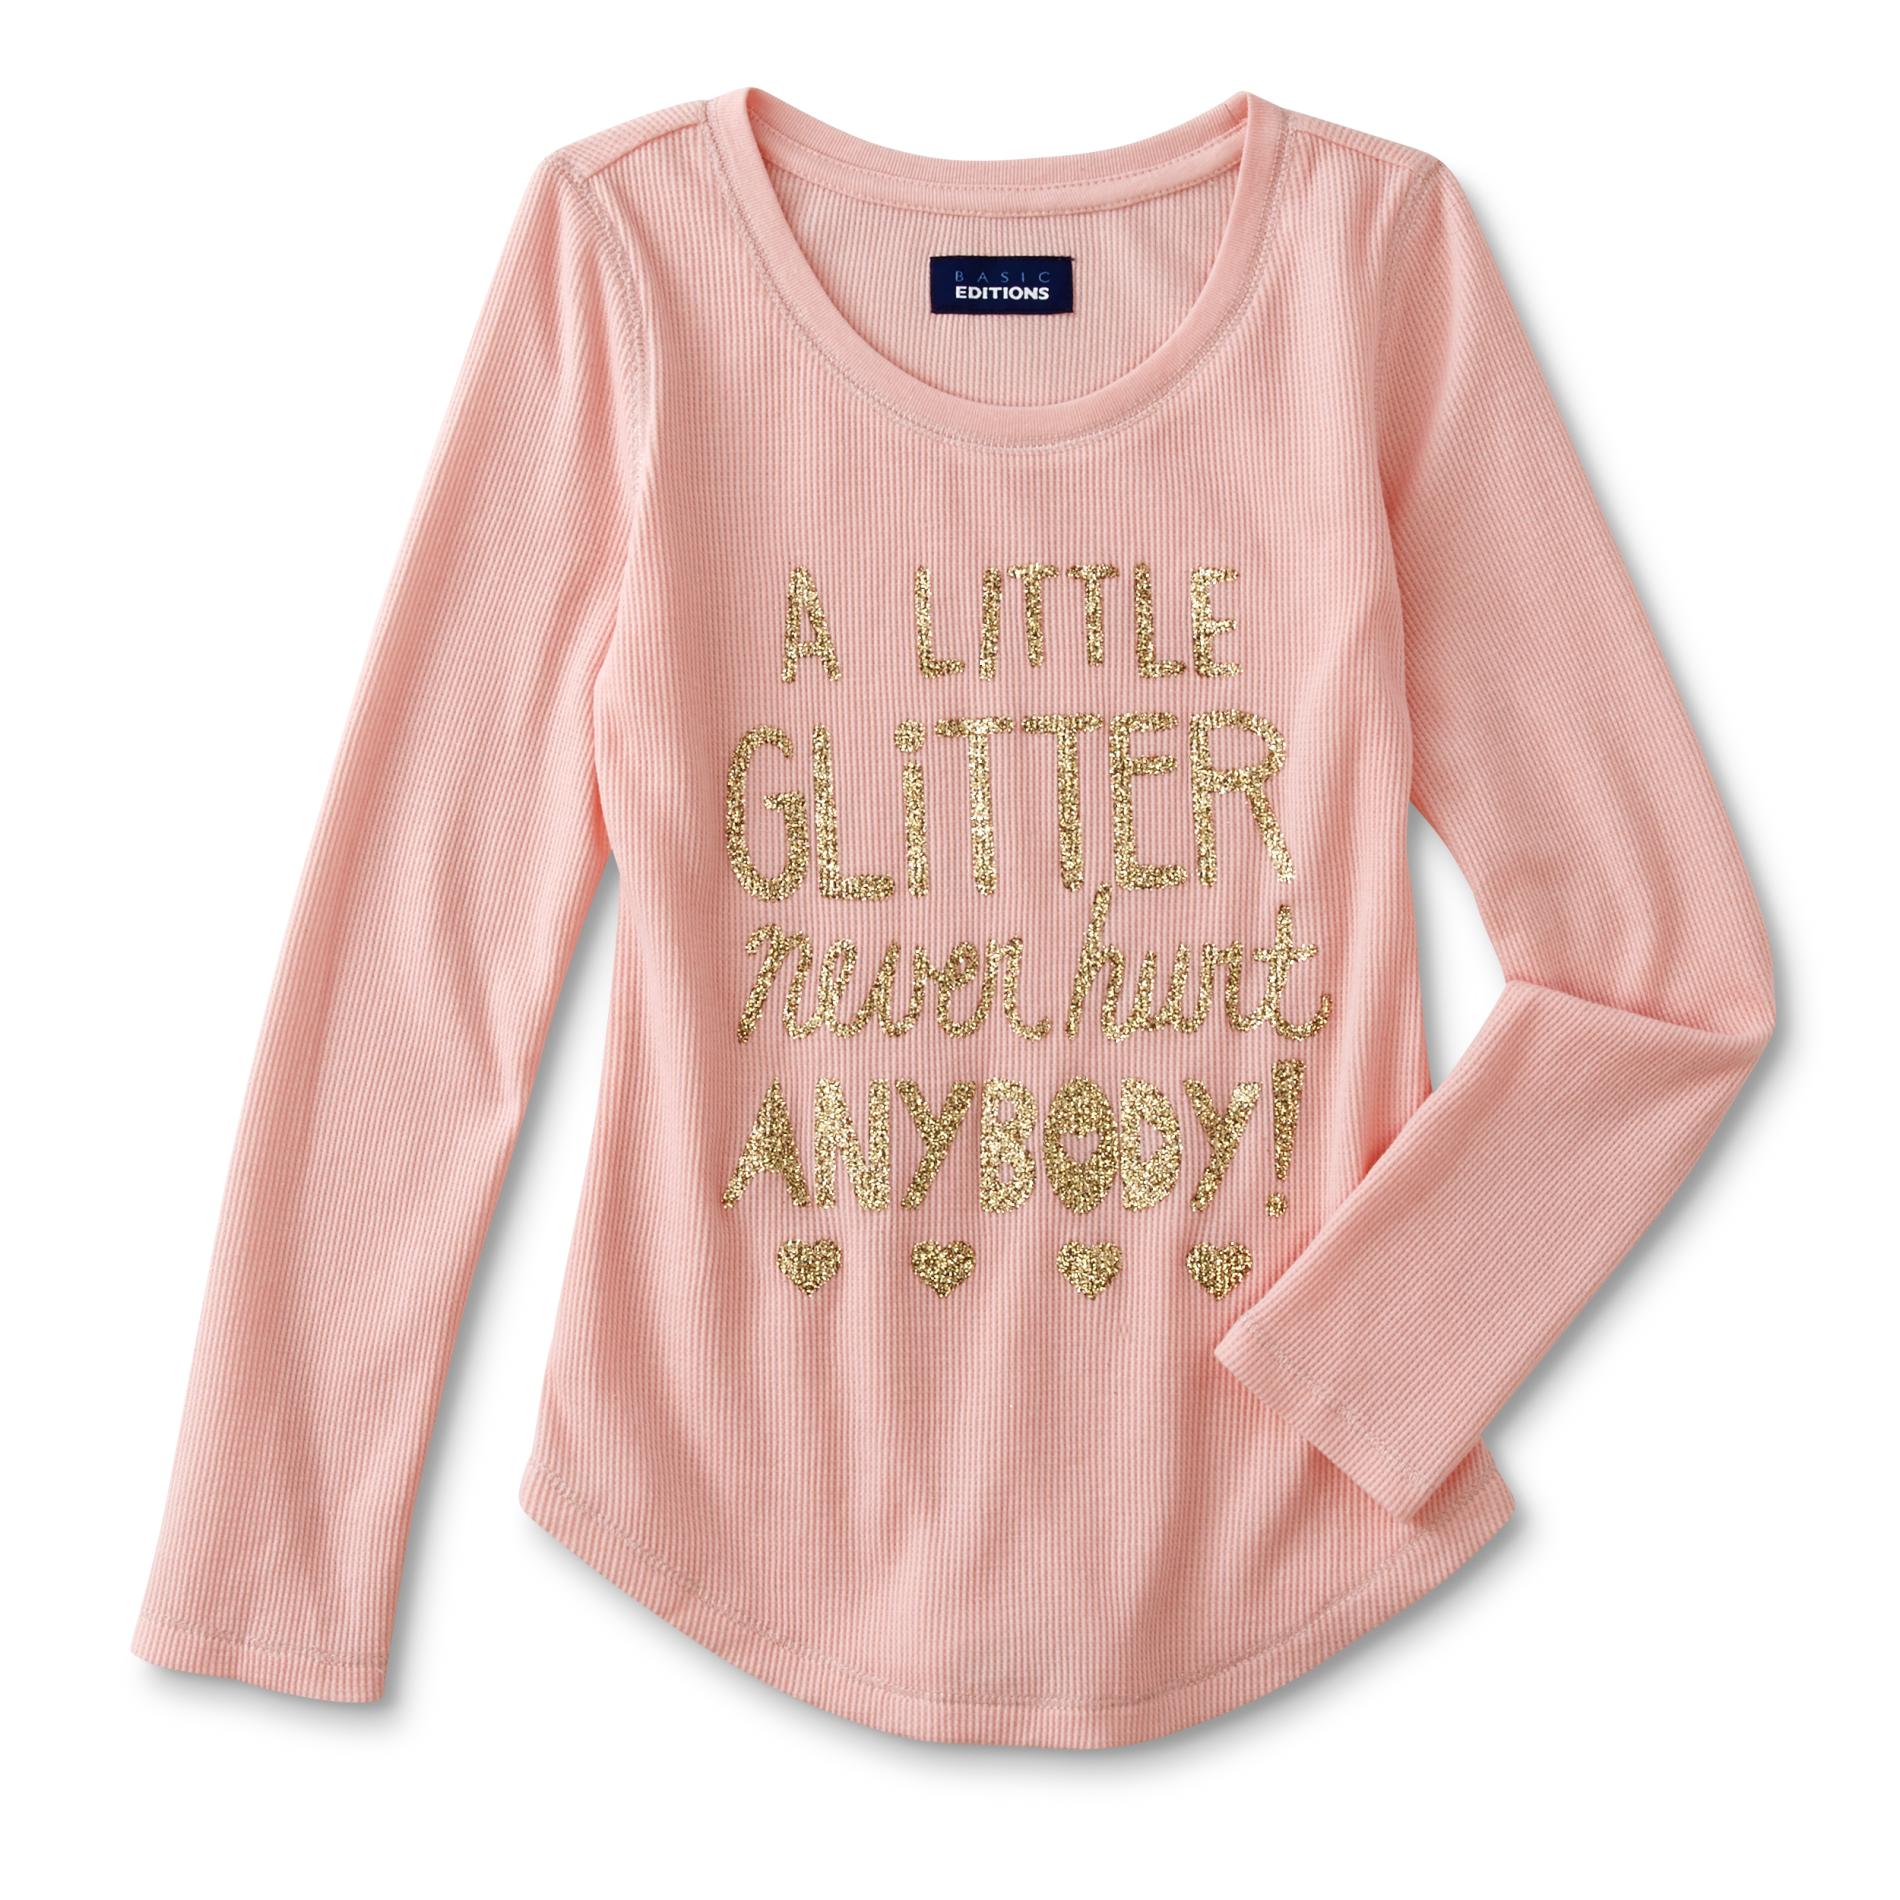 Basic Editions Girl's Long-Sleeve Thermal Top - A Little Glitter